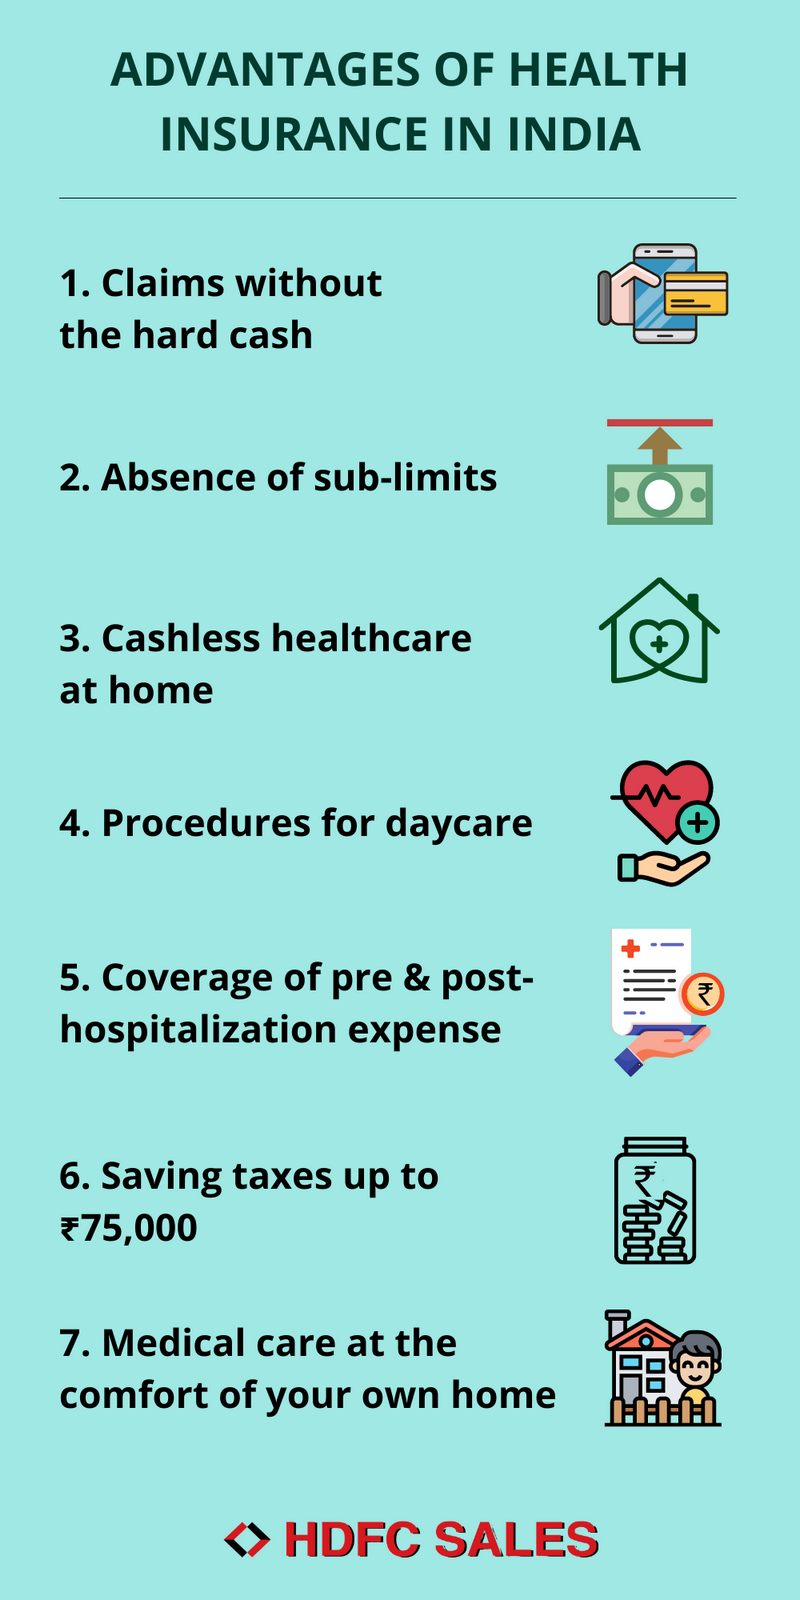 The Advantages of Health Insurance